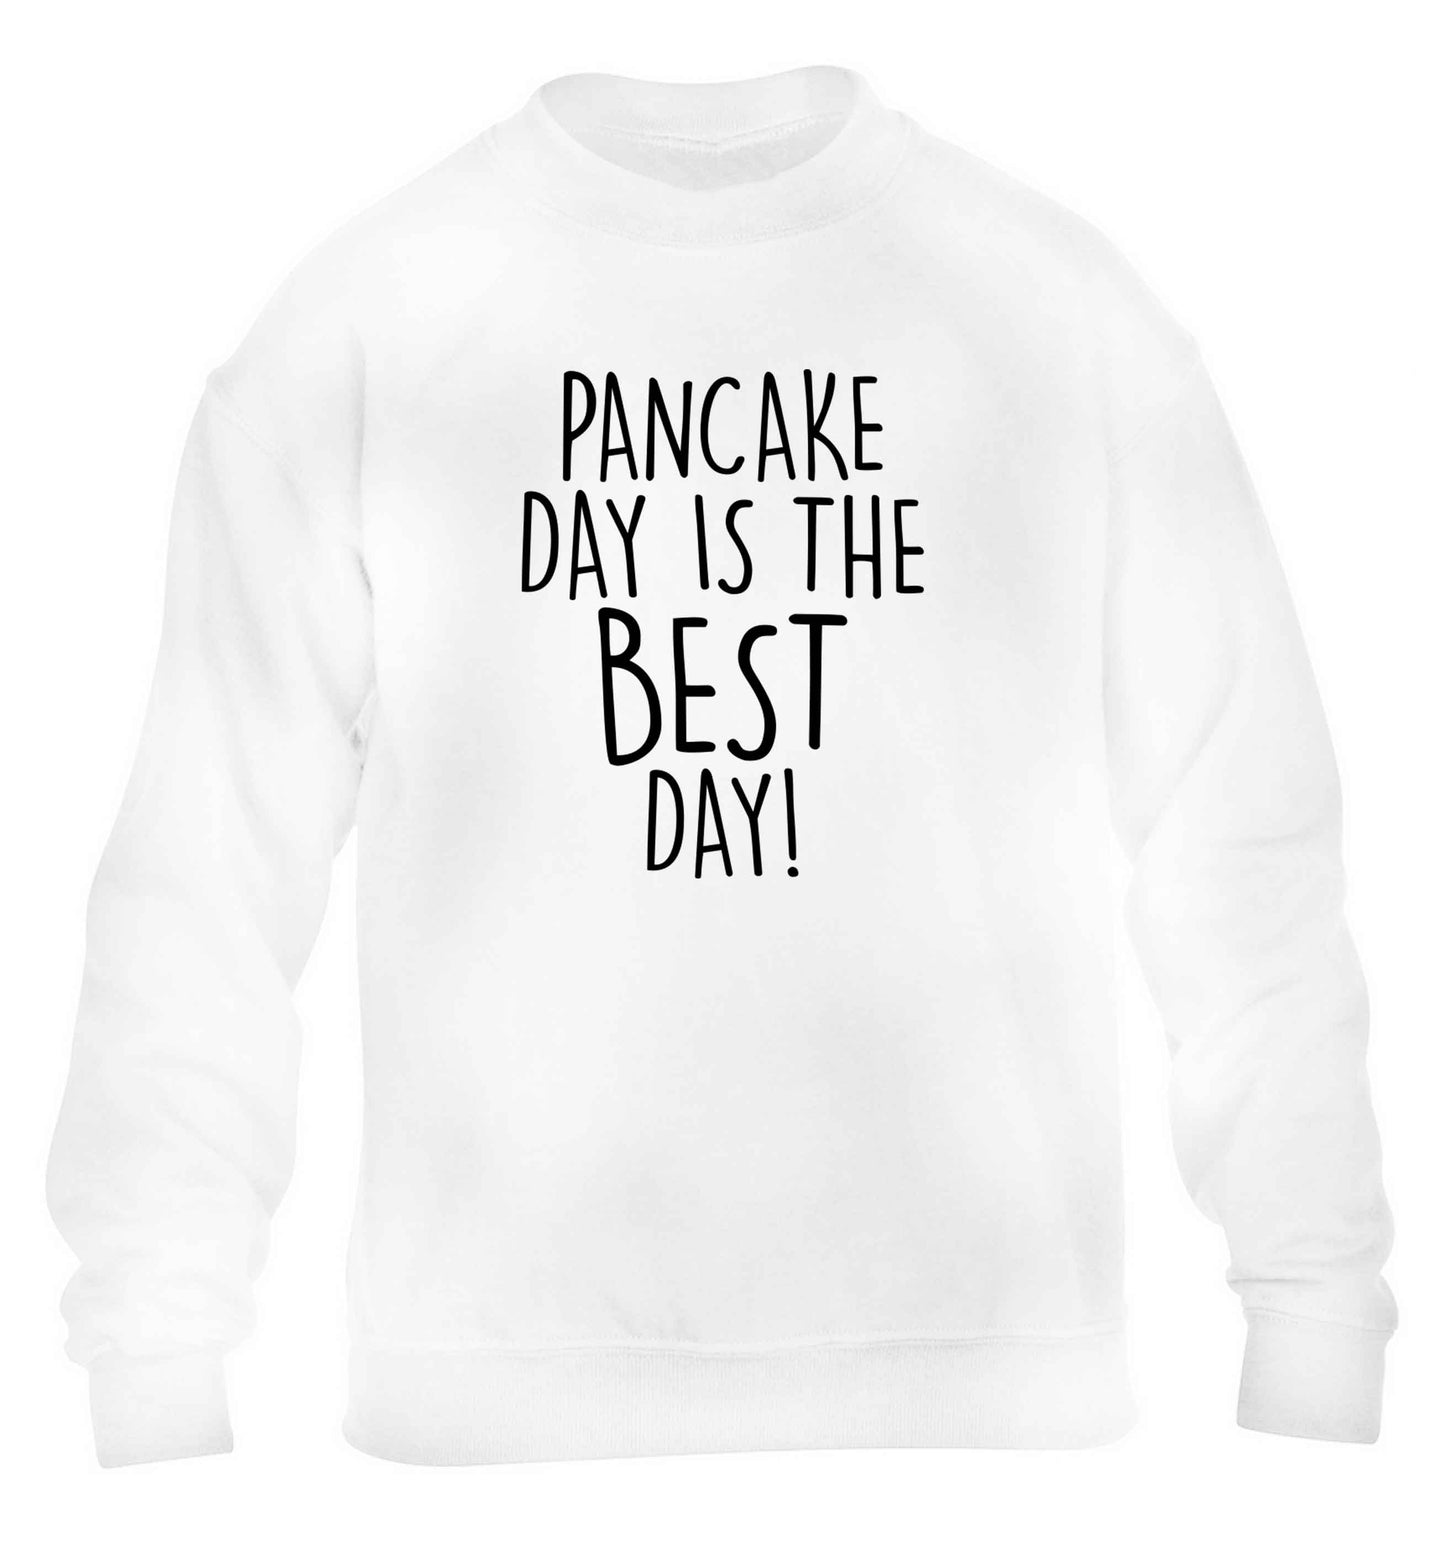 Pancake day is the best day children's white sweater 12-13 Years